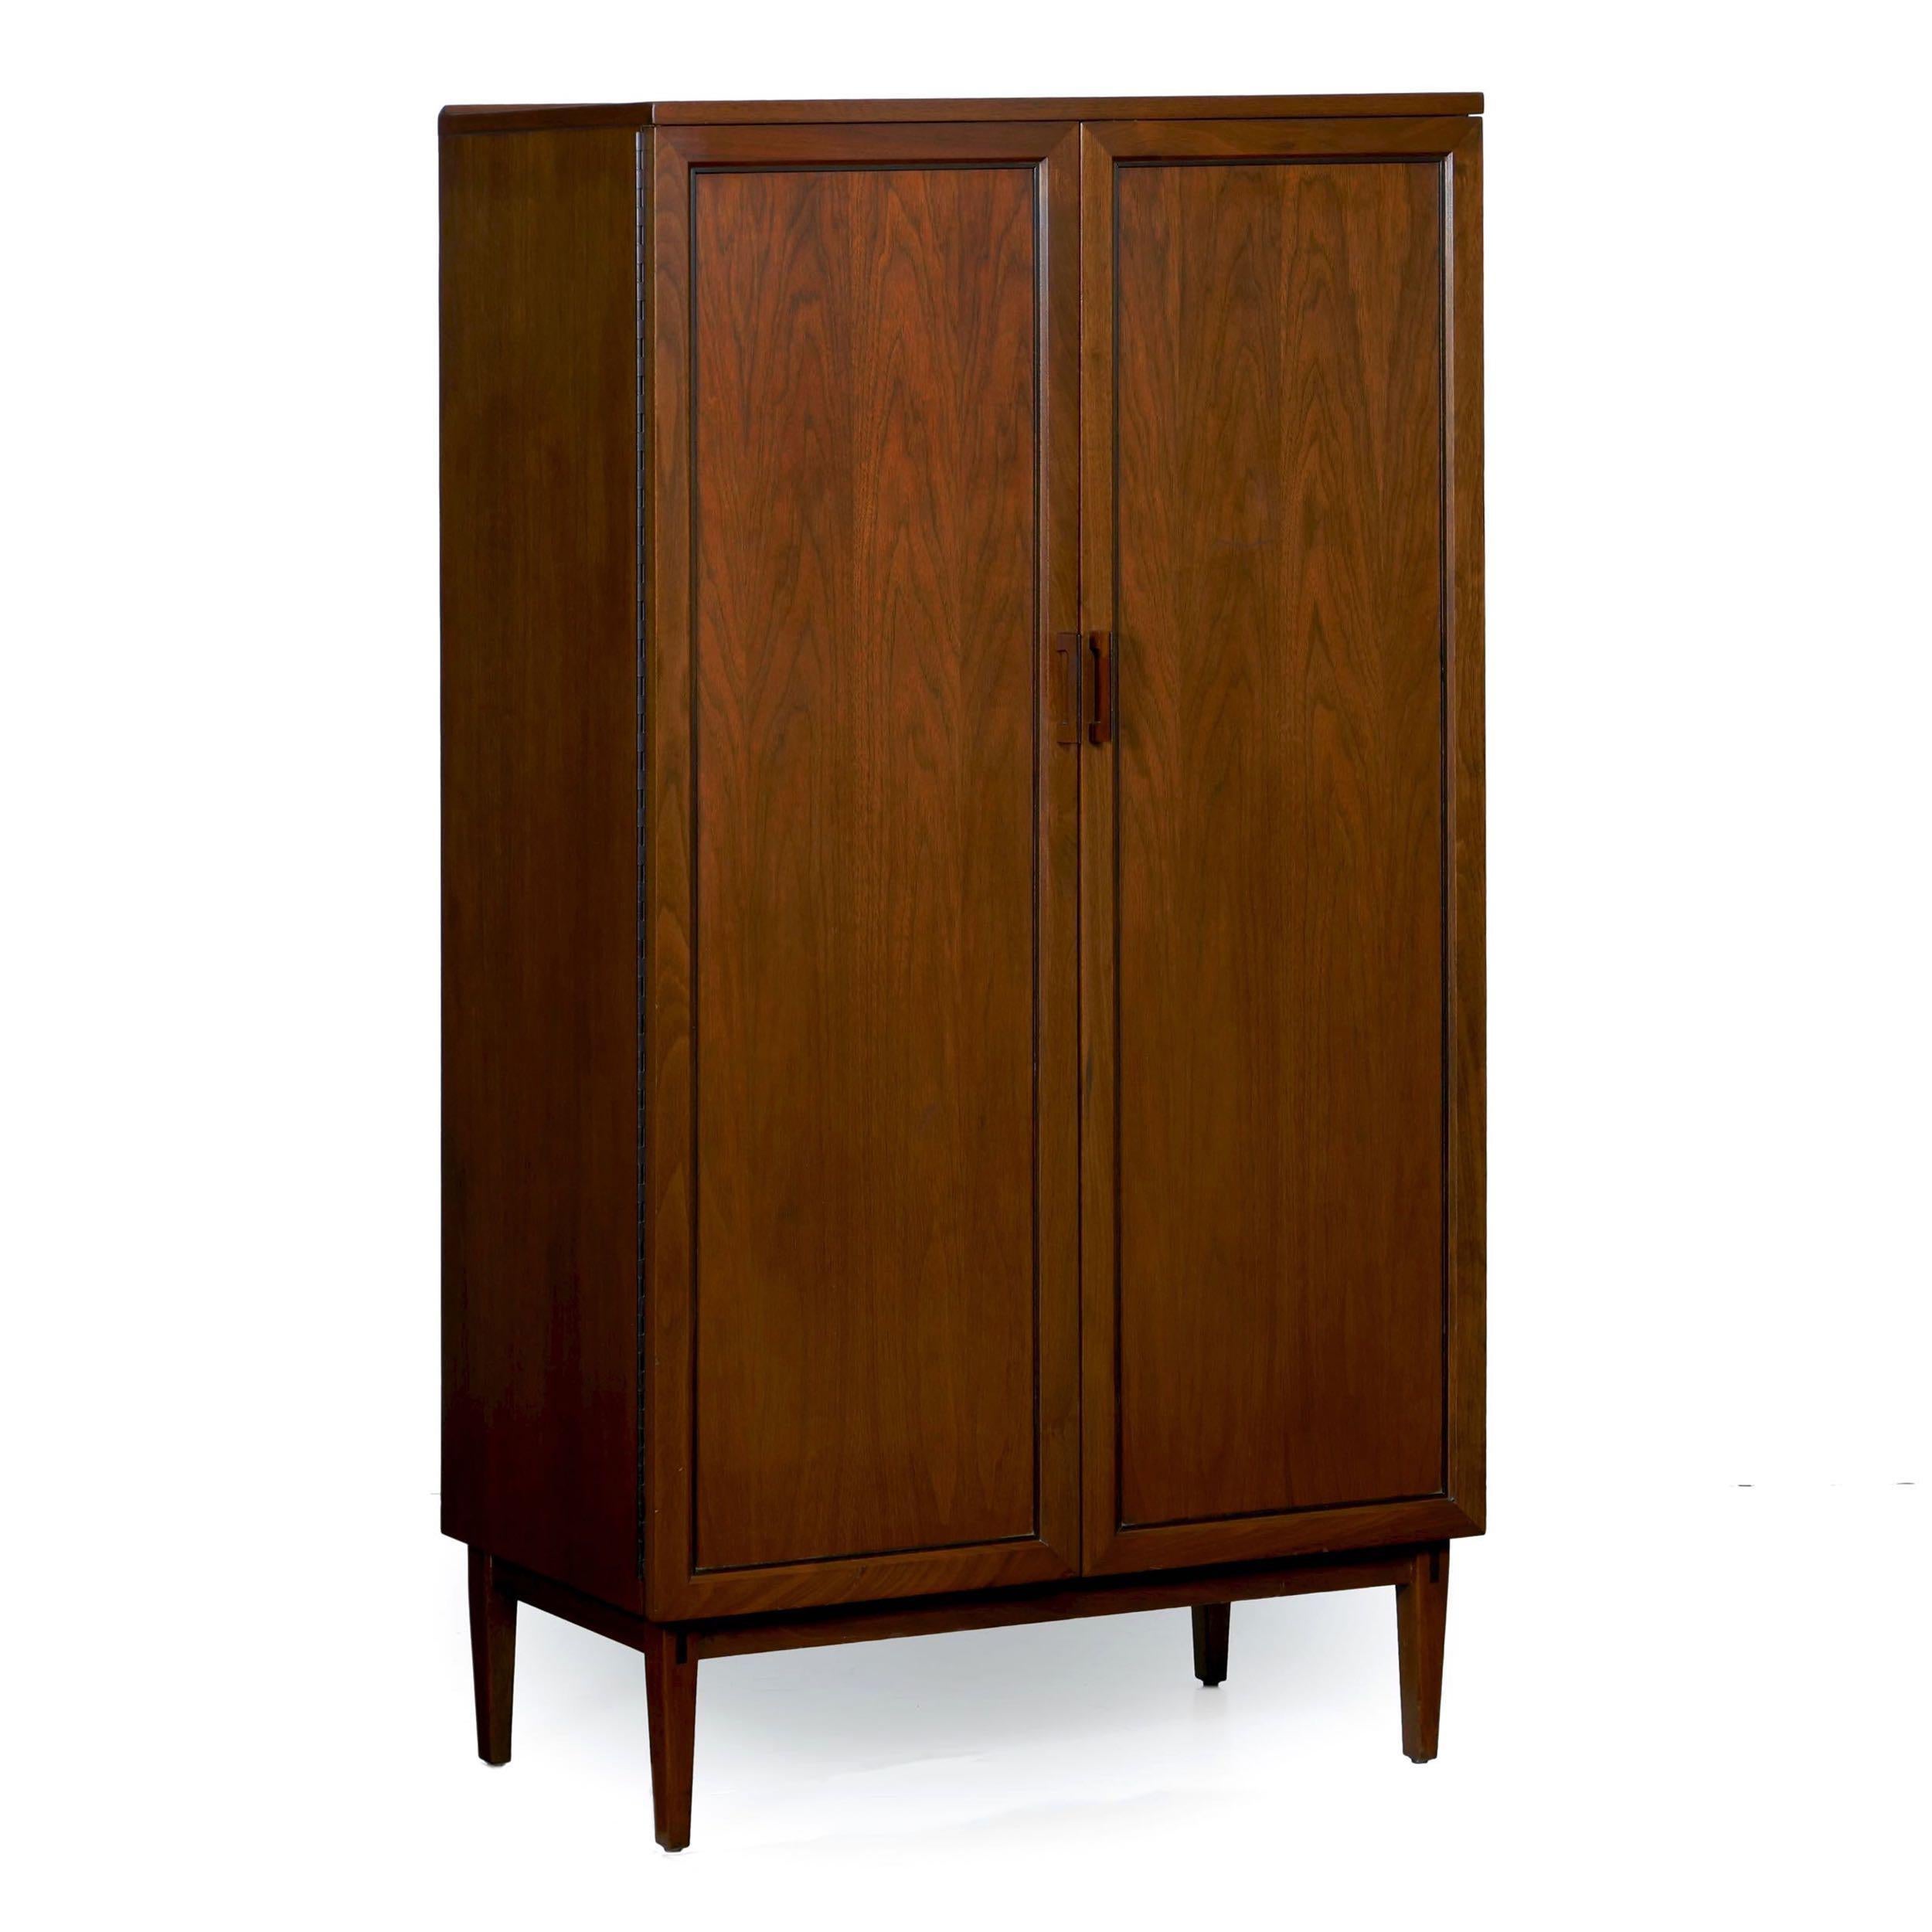 An interesting ten-drawer tall dresser designed by Kipp Stewart for the “Directional“ collection of Calvin Furniture Co., the cabinet form is sleek and austere. By utilizing a pair of doors instead of the long series of drawers, the case is tidy and